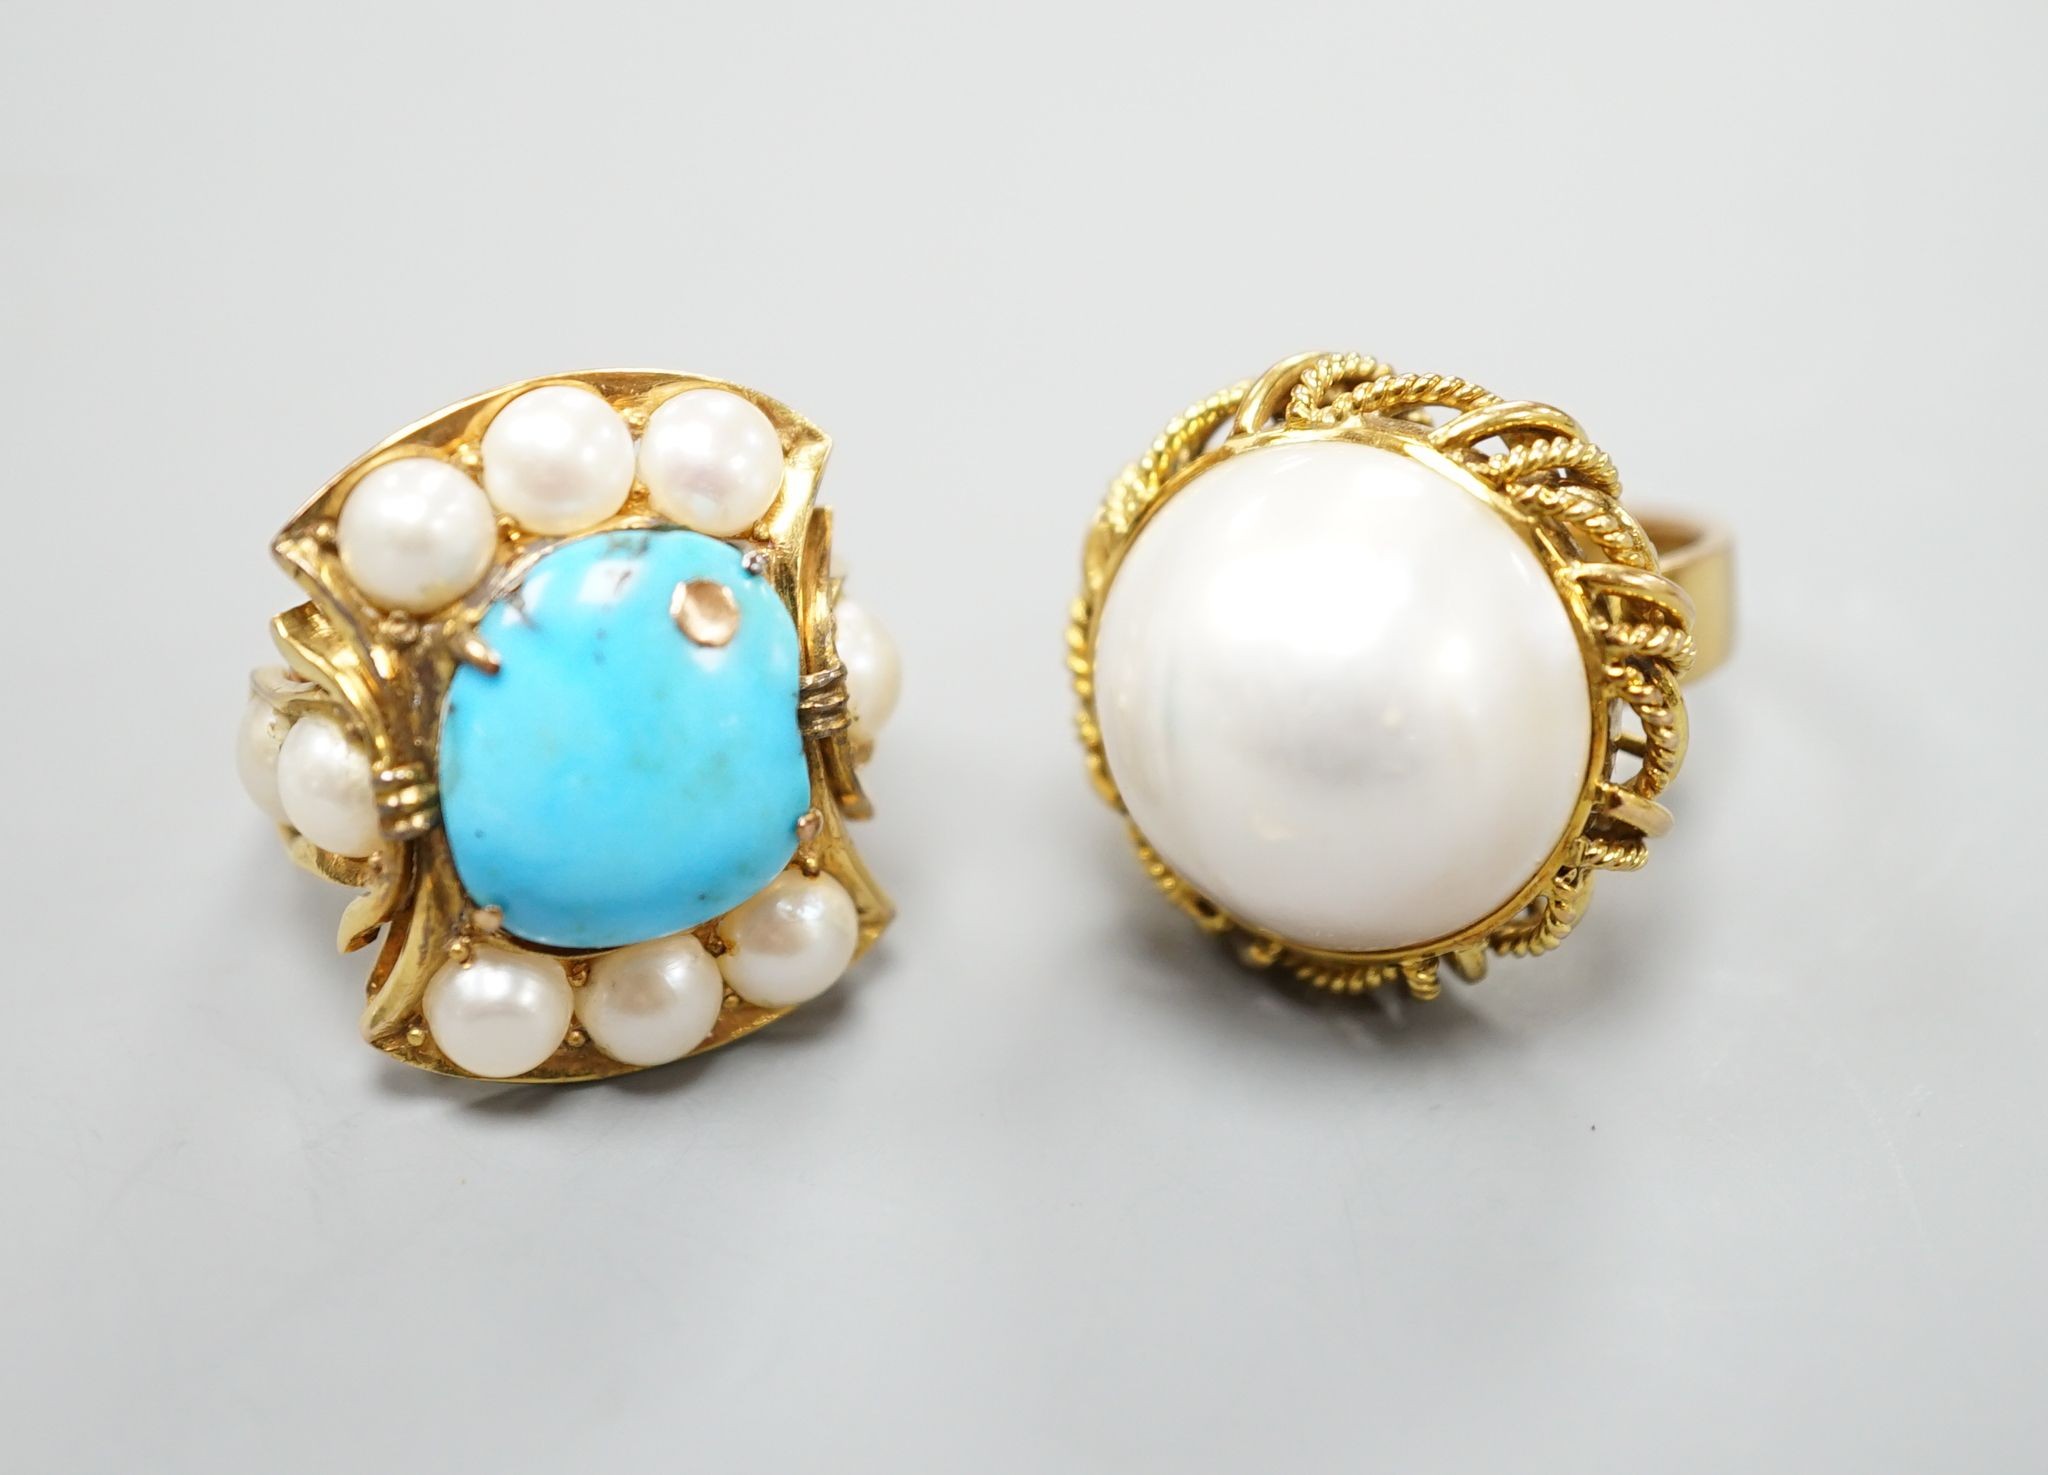 A 14k yellow metal and mabe pearl set dress ring and a similar split pearl and turquoise set dress ring, both size M, gross weight 21.7 grams.